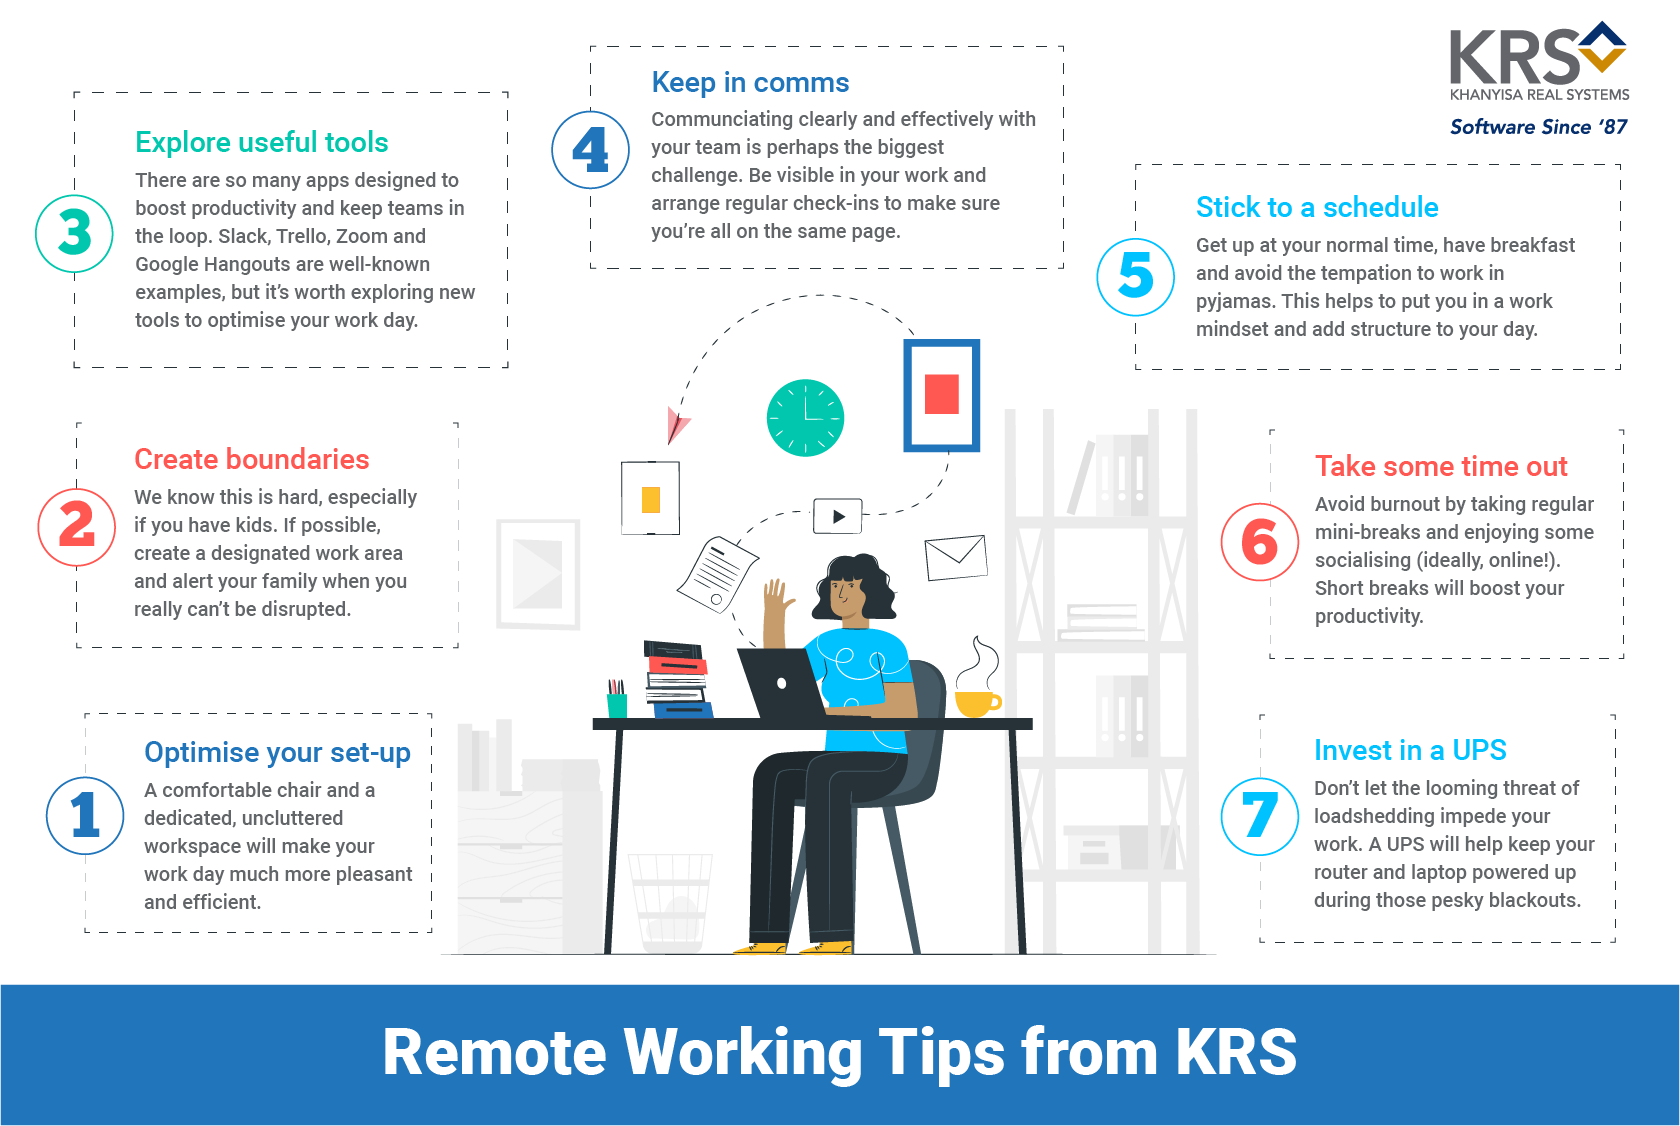 Working from home tips graphic from KRS